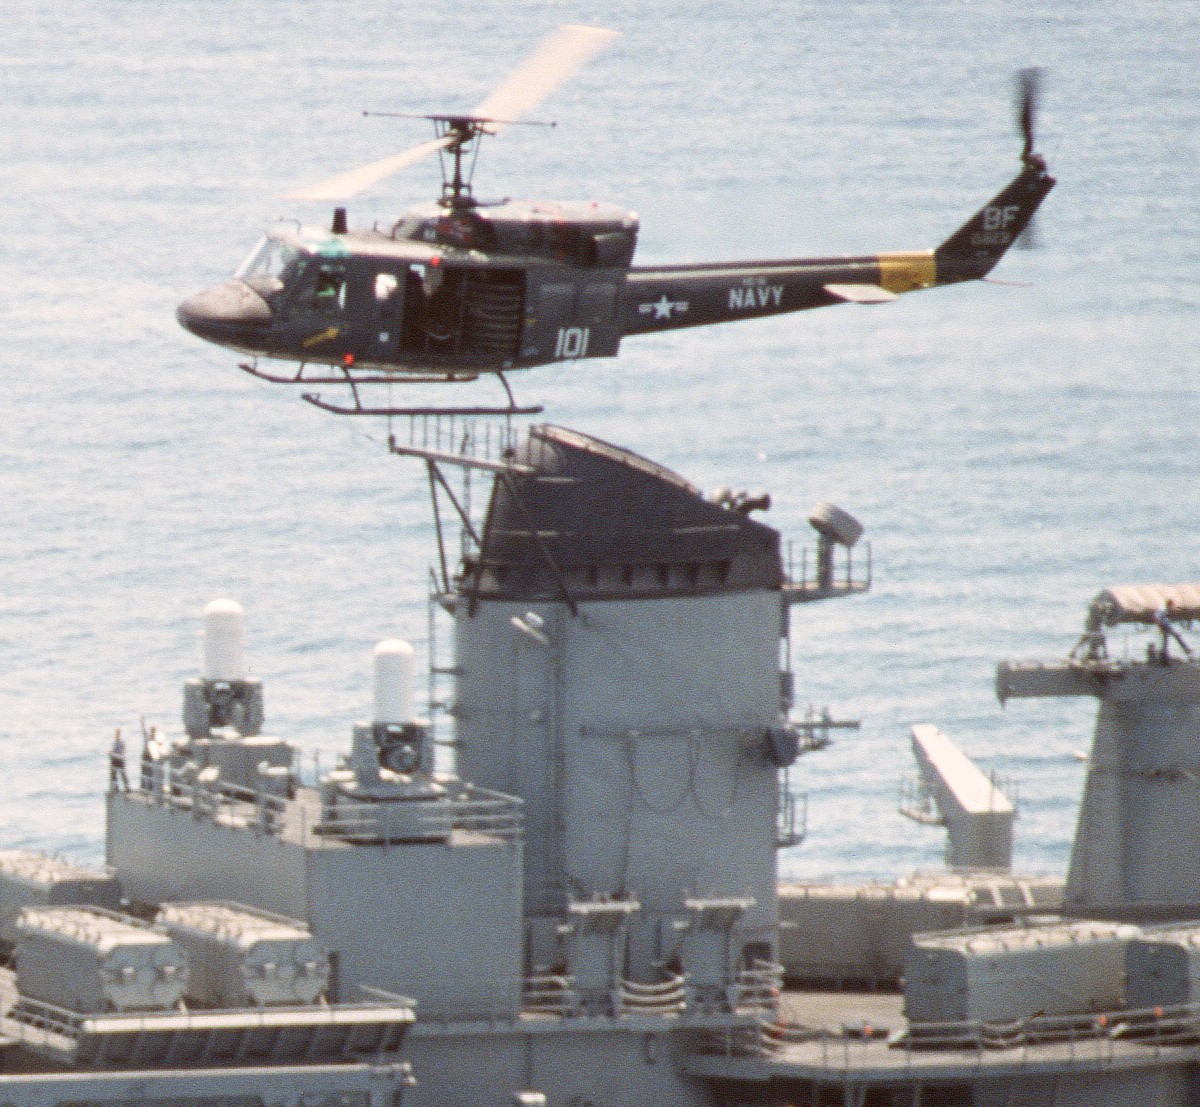 hc-16 bullfrogs helicopter combat support squadron navy uh-1n iroquois 15